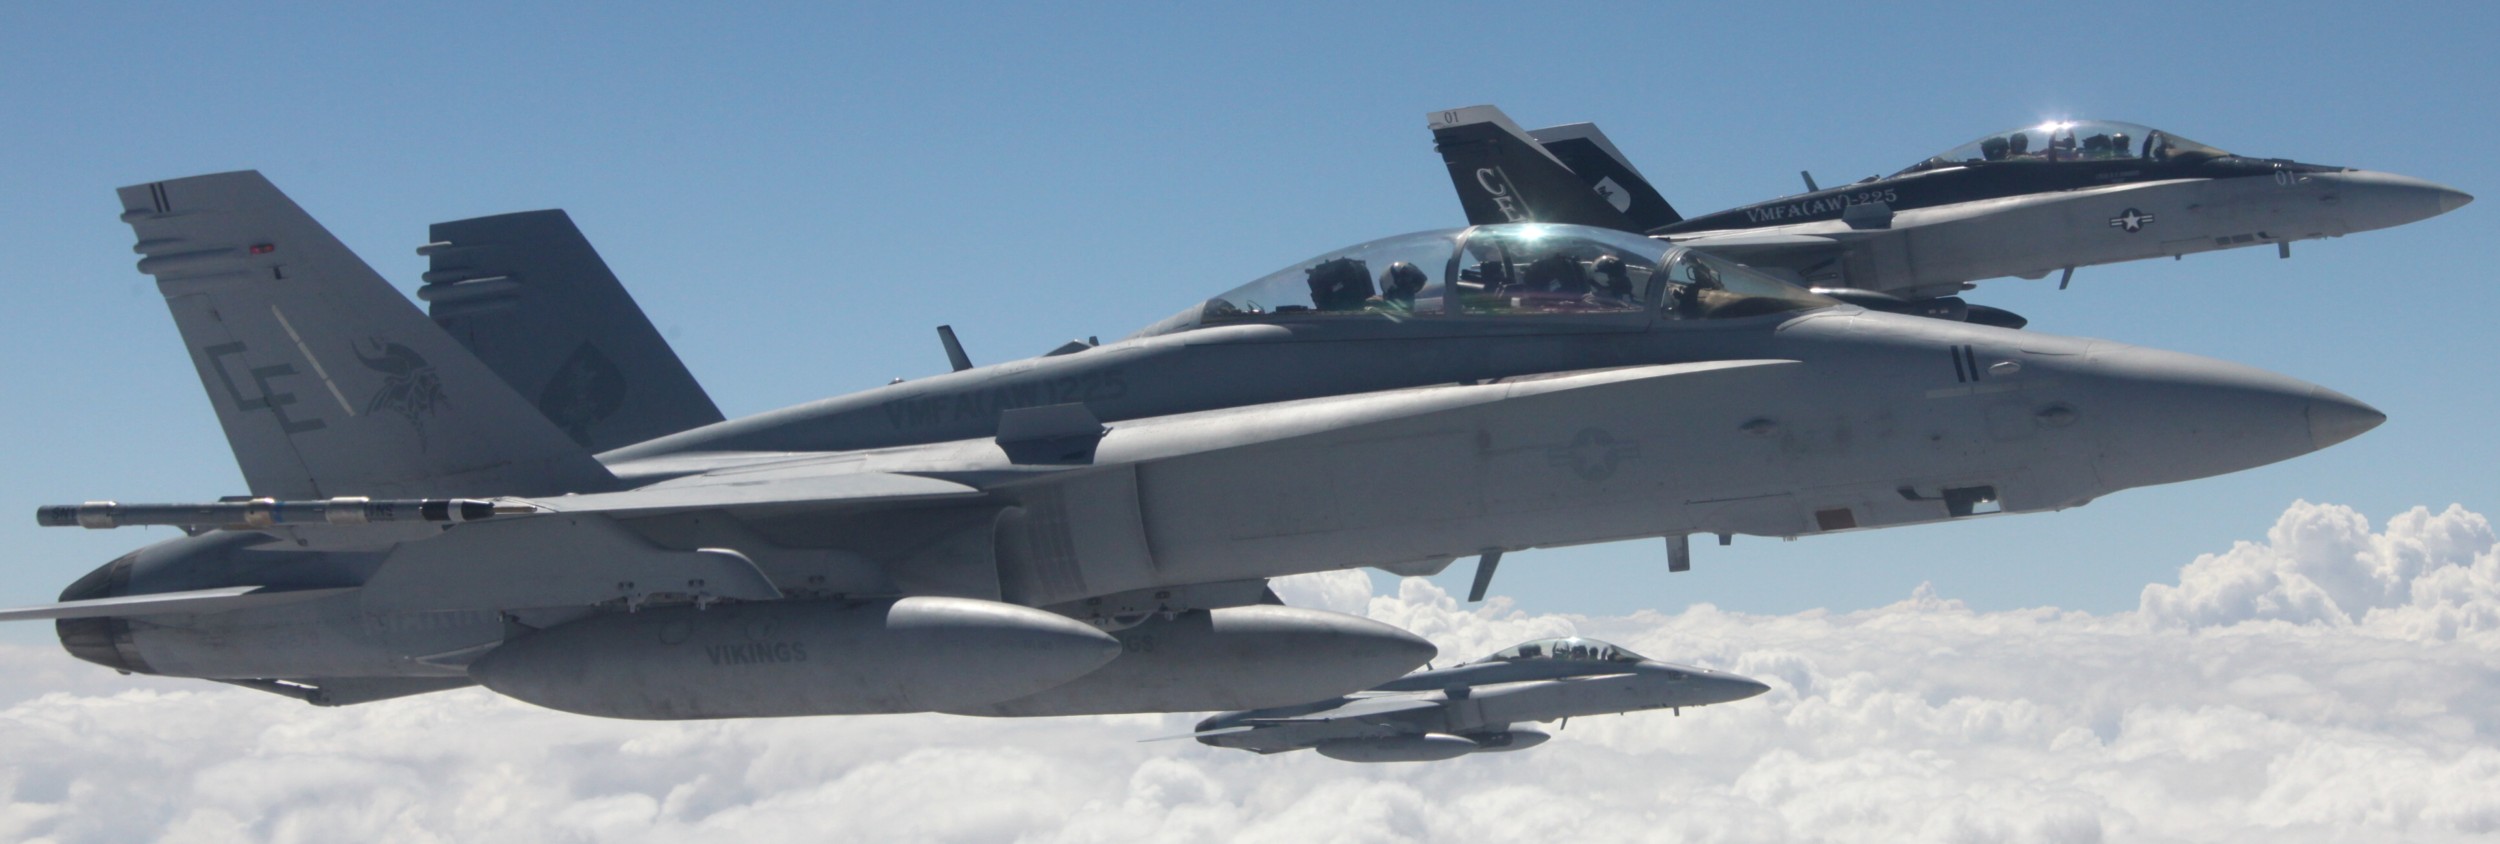 vmfa(aw)-225 vikings marine fighter attack squadron f/a-18d hornet 53